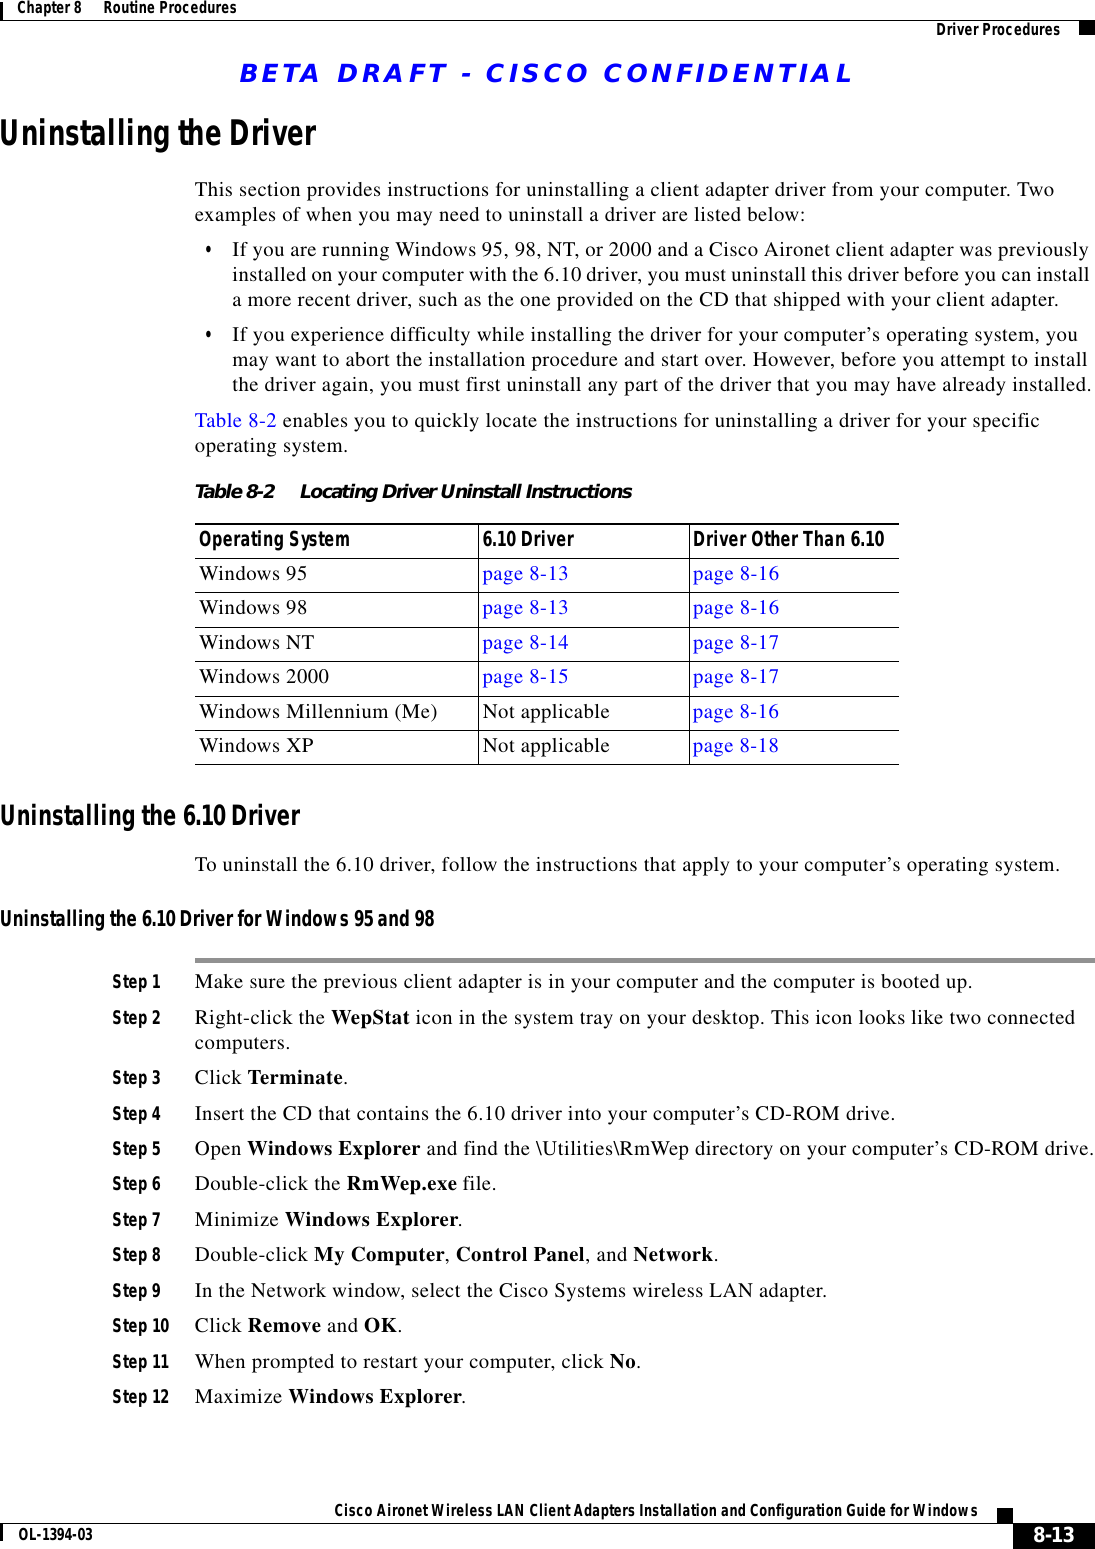 BETA DRAFT - CISCO CONFIDENTIAL8-13Cisco Aironet Wireless LAN Client Adapters Installation and Configuration Guide for WindowsOL-1394-03Chapter 8      Routine Procedures Driver ProceduresUninstalling the DriverThis section provides instructions for uninstalling a client adapter driver from your computer. Two examples of when you may need to uninstall a driver are listed below:•If you are running Windows 95, 98, NT, or 2000 and a Cisco Aironet client adapter was previously installed on your computer with the 6.10 driver, you must uninstall this driver before you can install a more recent driver, such as the one provided on the CD that shipped with your client adapter.•If you experience difficulty while installing the driver for your computer’s operating system, you may want to abort the installation procedure and start over. However, before you attempt to install the driver again, you must first uninstall any part of the driver that you may have already installed.Table 8-2 enables you to quickly locate the instructions for uninstalling a driver for your specific operating system.Uninstalling the 6.10 DriverTo uninstall the 6.10 driver, follow the instructions that apply to your computer’s operating system.Uninstalling the 6.10 Driver for Windows 95 and 98Step 1 Make sure the previous client adapter is in your computer and the computer is booted up.Step 2 Right-click the WepStat icon in the system tray on your desktop. This icon looks like two connected computers.Step 3 Click Terminate.Step 4 Insert the CD that contains the 6.10 driver into your computer’s CD-ROM drive.Step 5 Open Windows Explorer and find the \Utilities\RmWep directory on your computer’s CD-ROM drive.Step 6 Double-click the RmWep.exe file.Step 7 Minimize Windows Explorer.Step 8 Double-click My Computer, Control Panel, and Network.Step 9 In the Network window, select the Cisco Systems wireless LAN adapter.Step 10 Click Remove and OK.Step 11 When prompted to restart your computer, click No.Step 12 Maximize Windows Explorer.Table 8-2 Locating Driver Uninstall InstructionsOperating System 6.10 Driver Driver Other Than 6.10Windows 95 page 8-13 page 8-16Windows 98 page 8-13 page 8-16Windows NT page 8-14 page 8-17Windows 2000 page 8-15 page 8-17Windows Millennium (Me) Not applicable page 8-16Windows XP Not applicable page 8-18